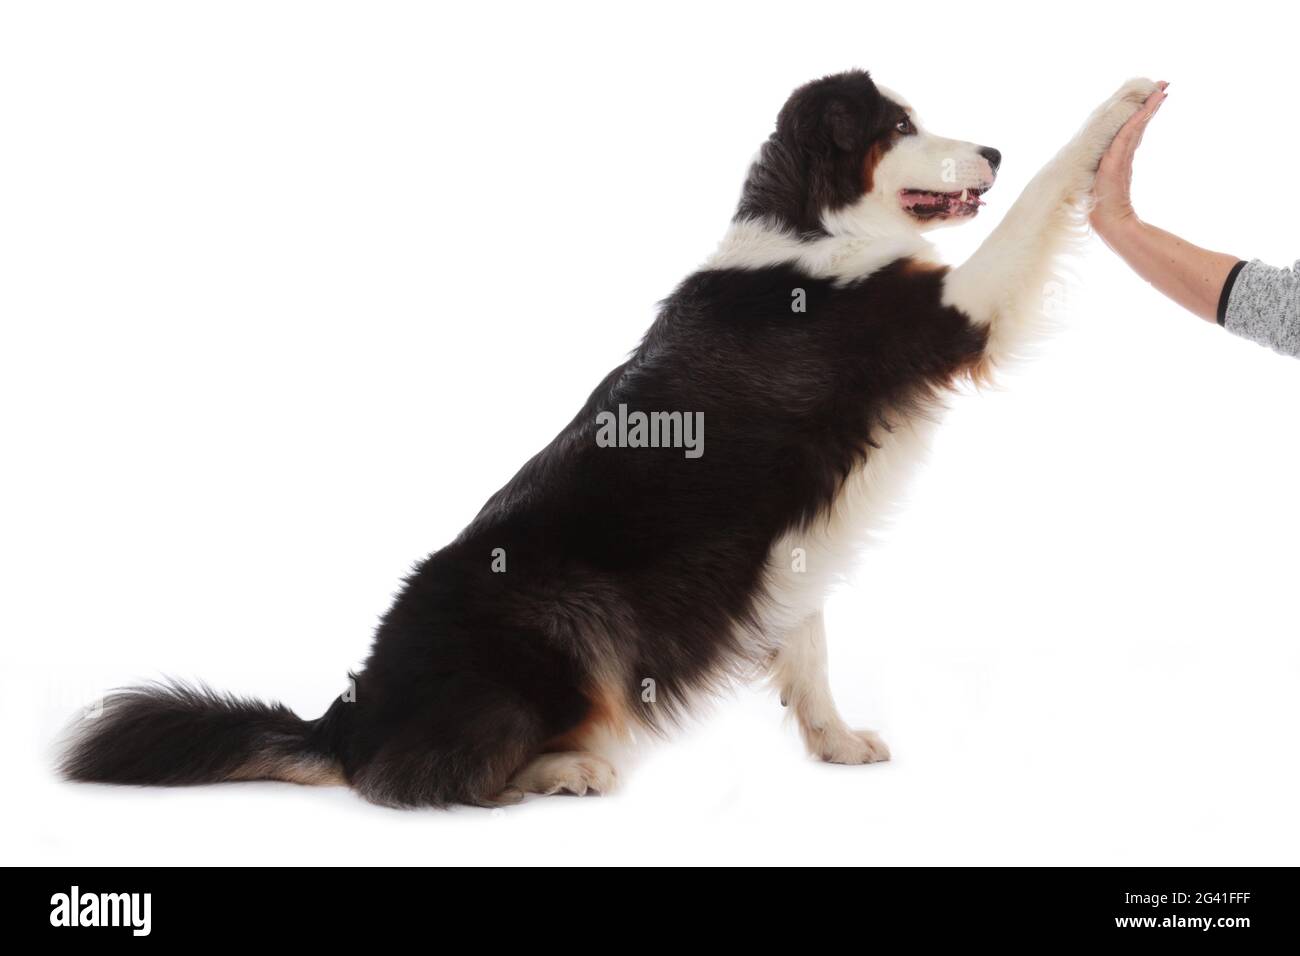 Dog gives paw to a human Stock Photo